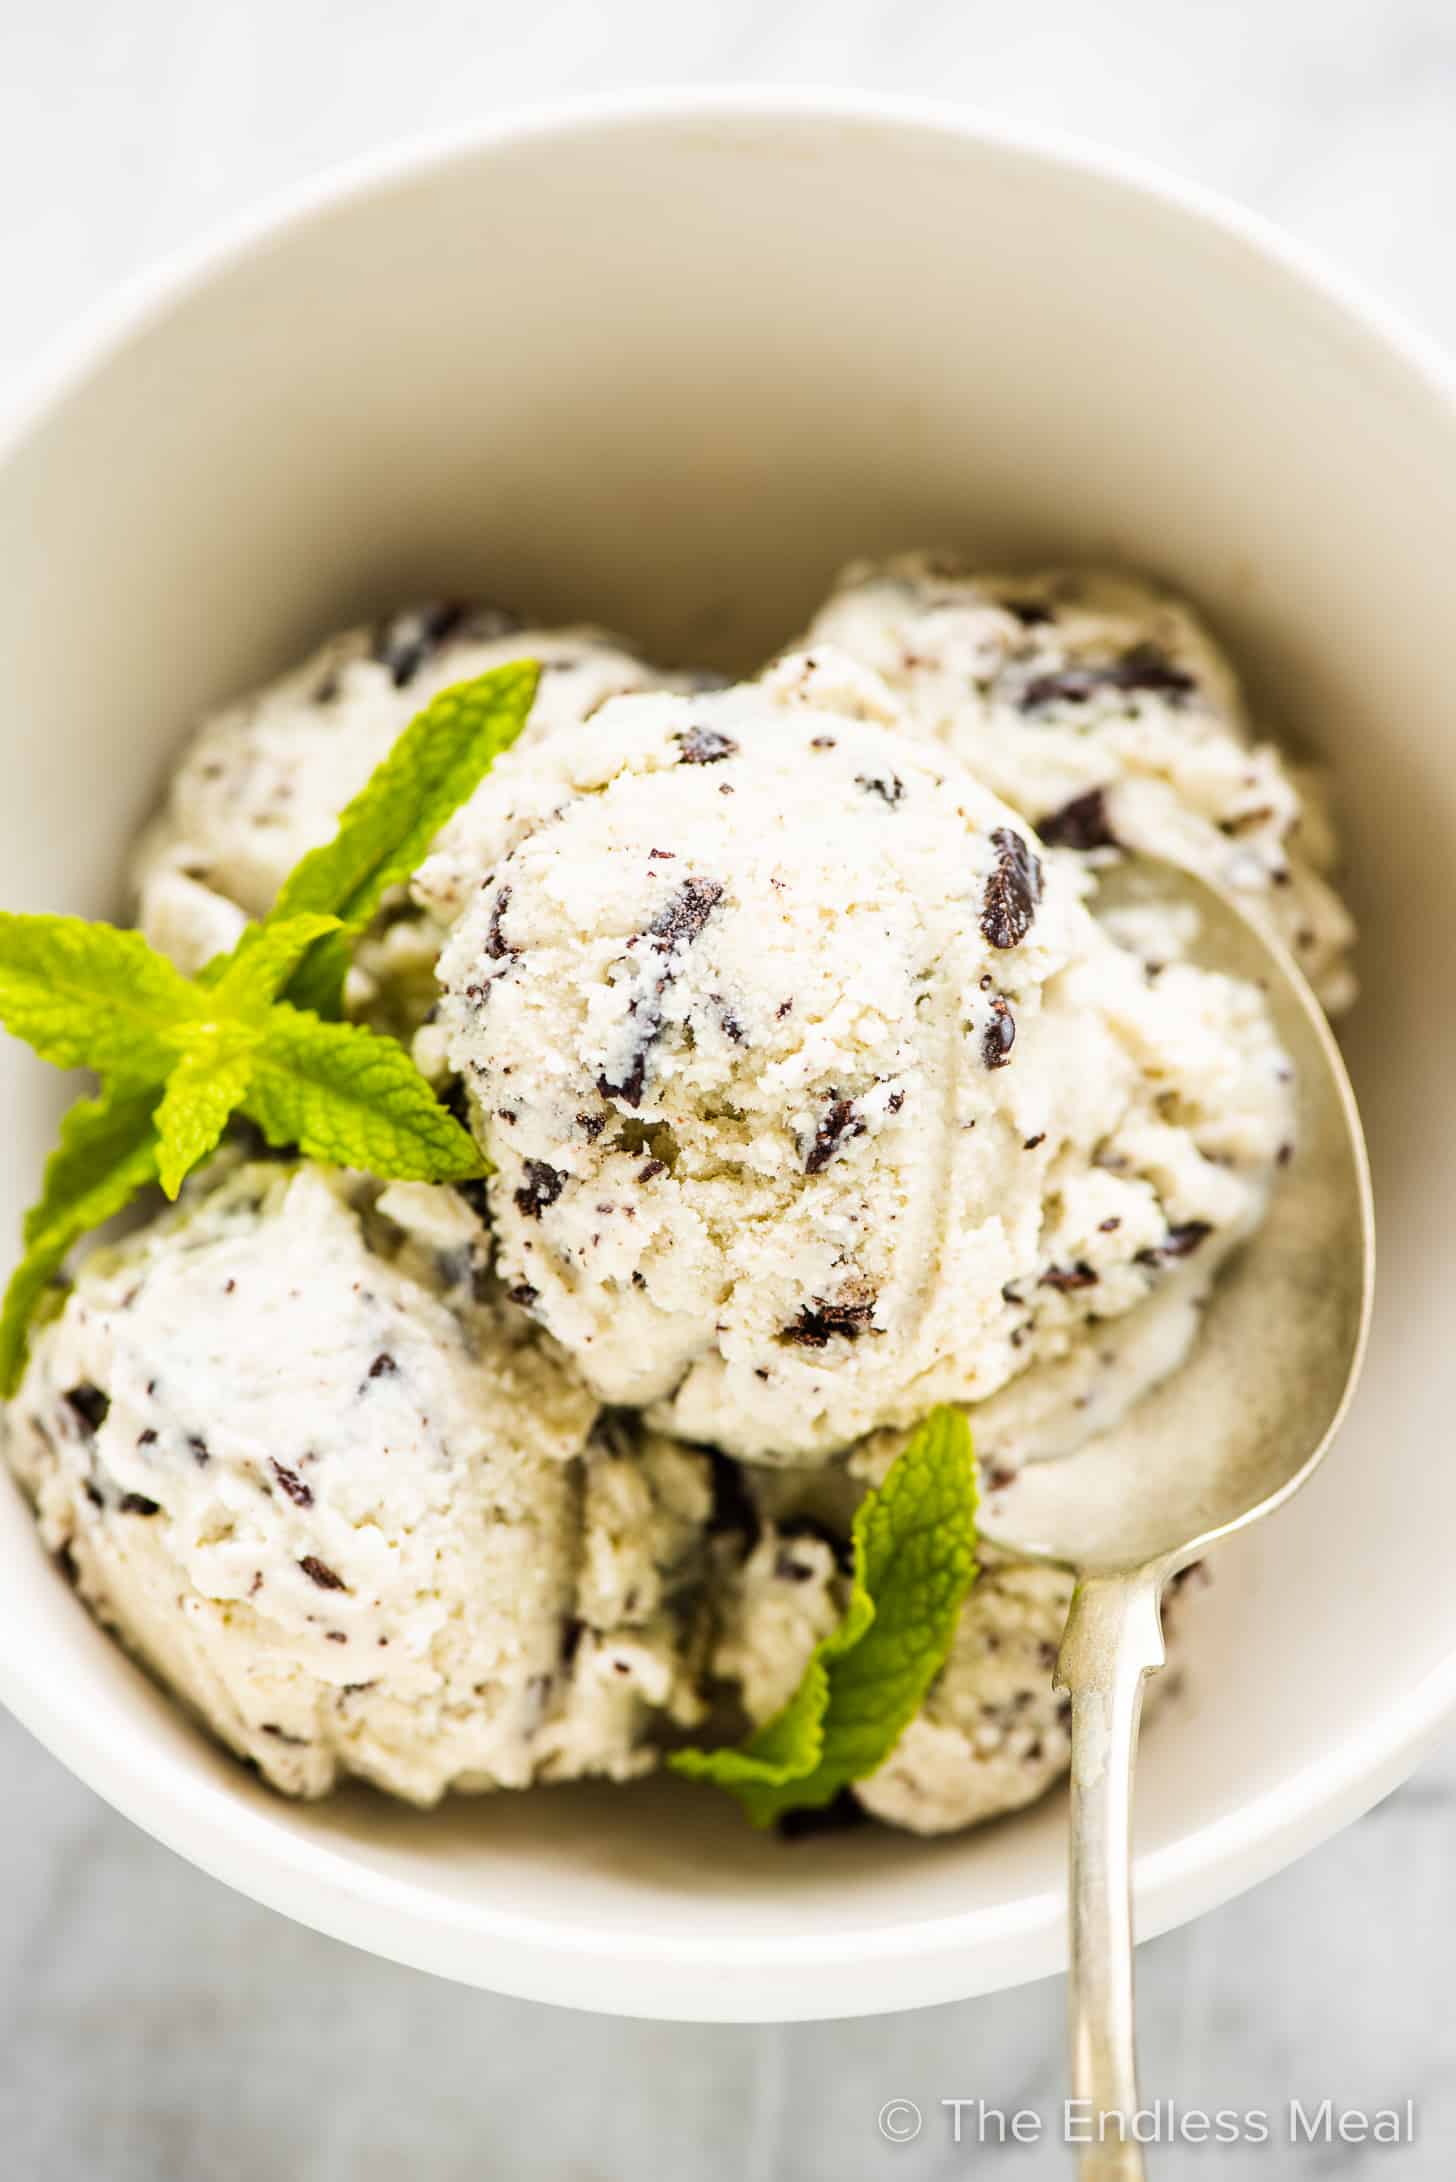 Mint chocolate chip ice cream in a white bowl with a spoon.